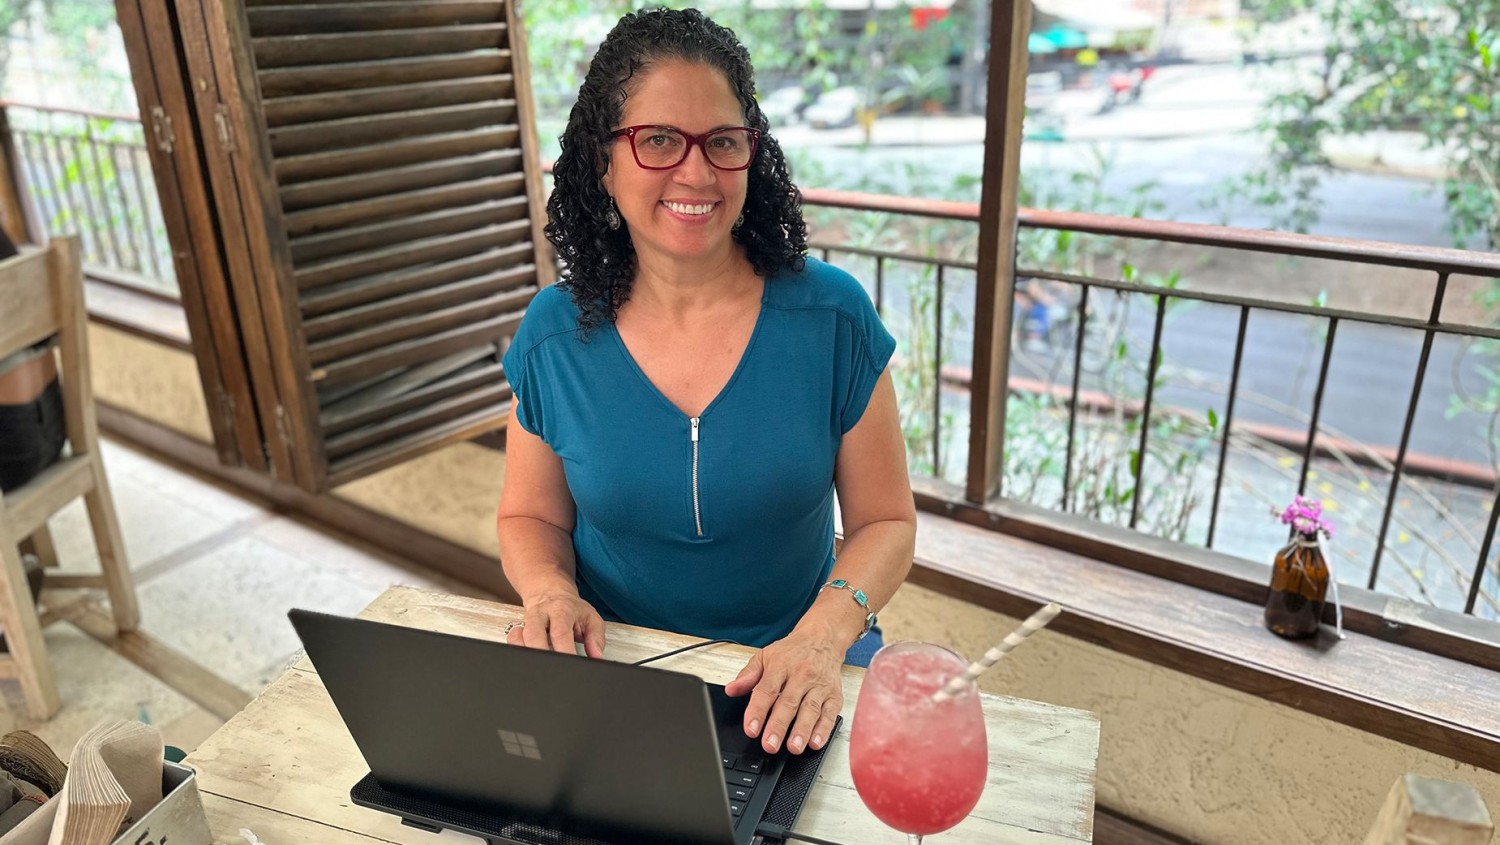 Julie Balzano | Julie Balzano from the US has relocated from Miami to Medellin, Colombia after struggling with rising living costs.